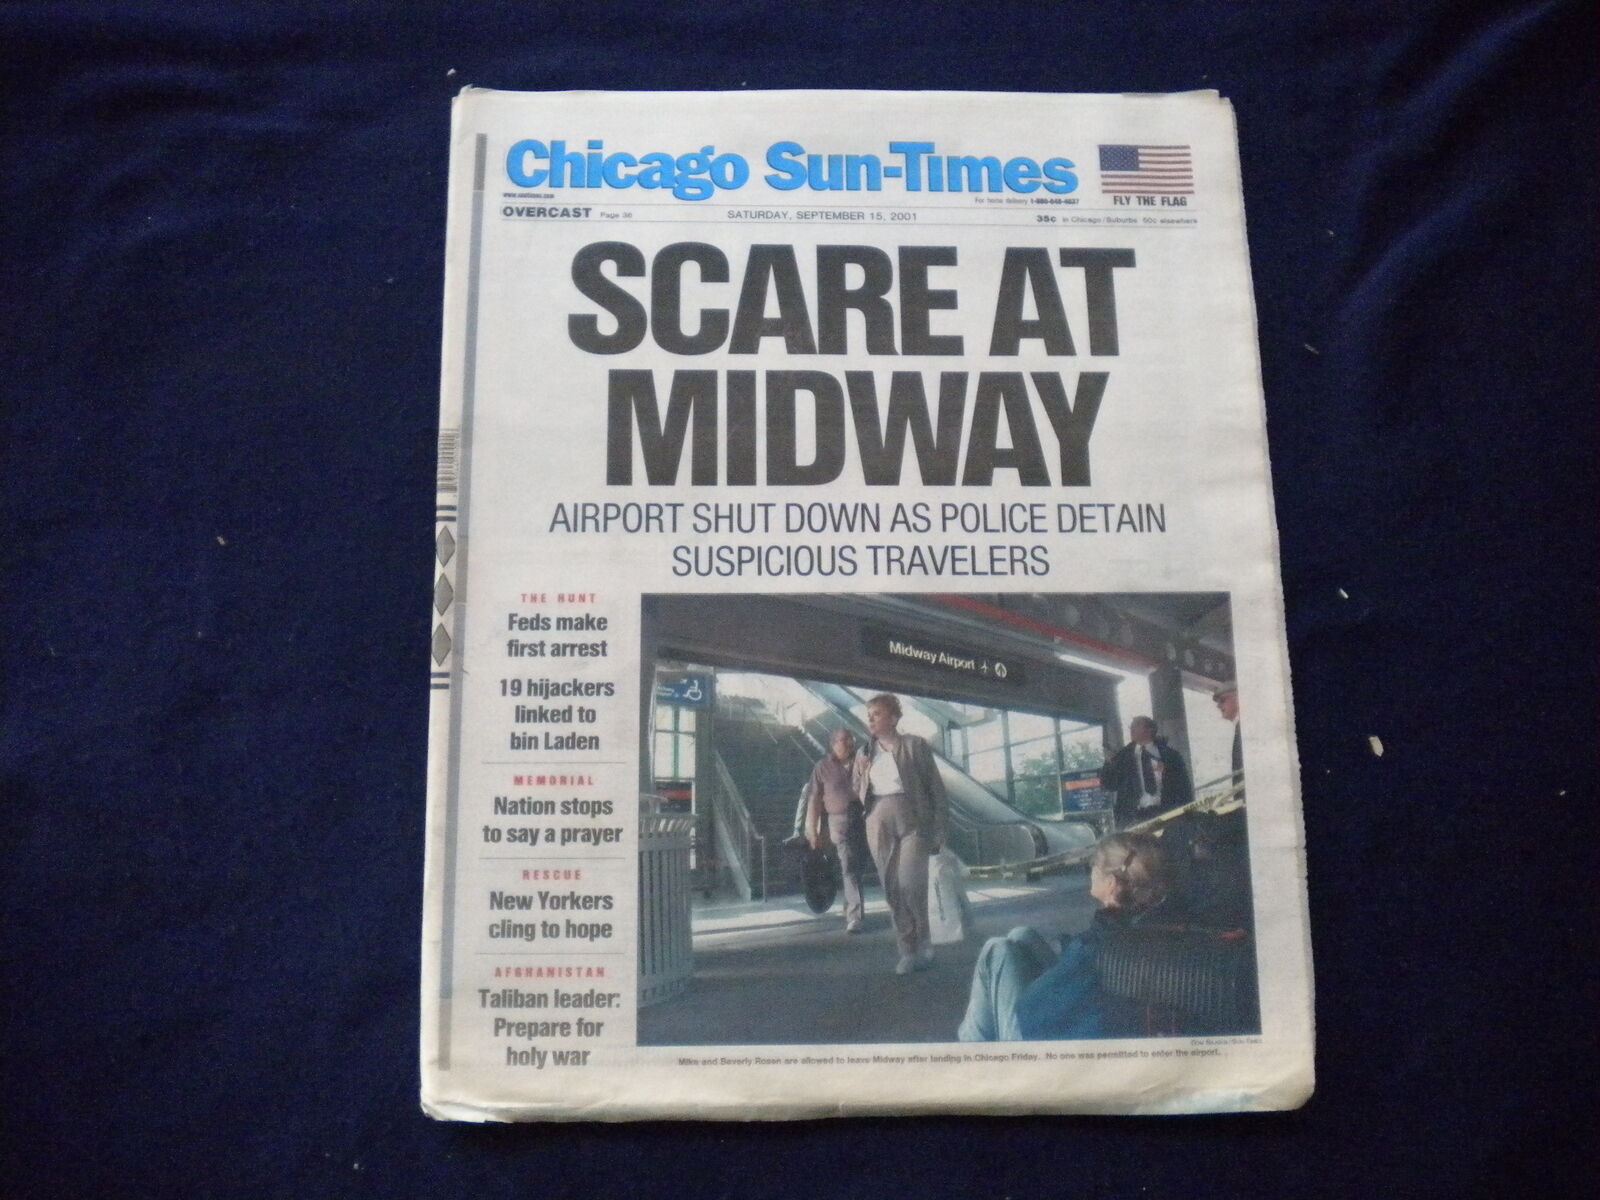 2001 SEPTEMBER 15 CHICAGO SUN-TIMES NEWSPAPER - SCARE AT MIDWAY - NP 5943